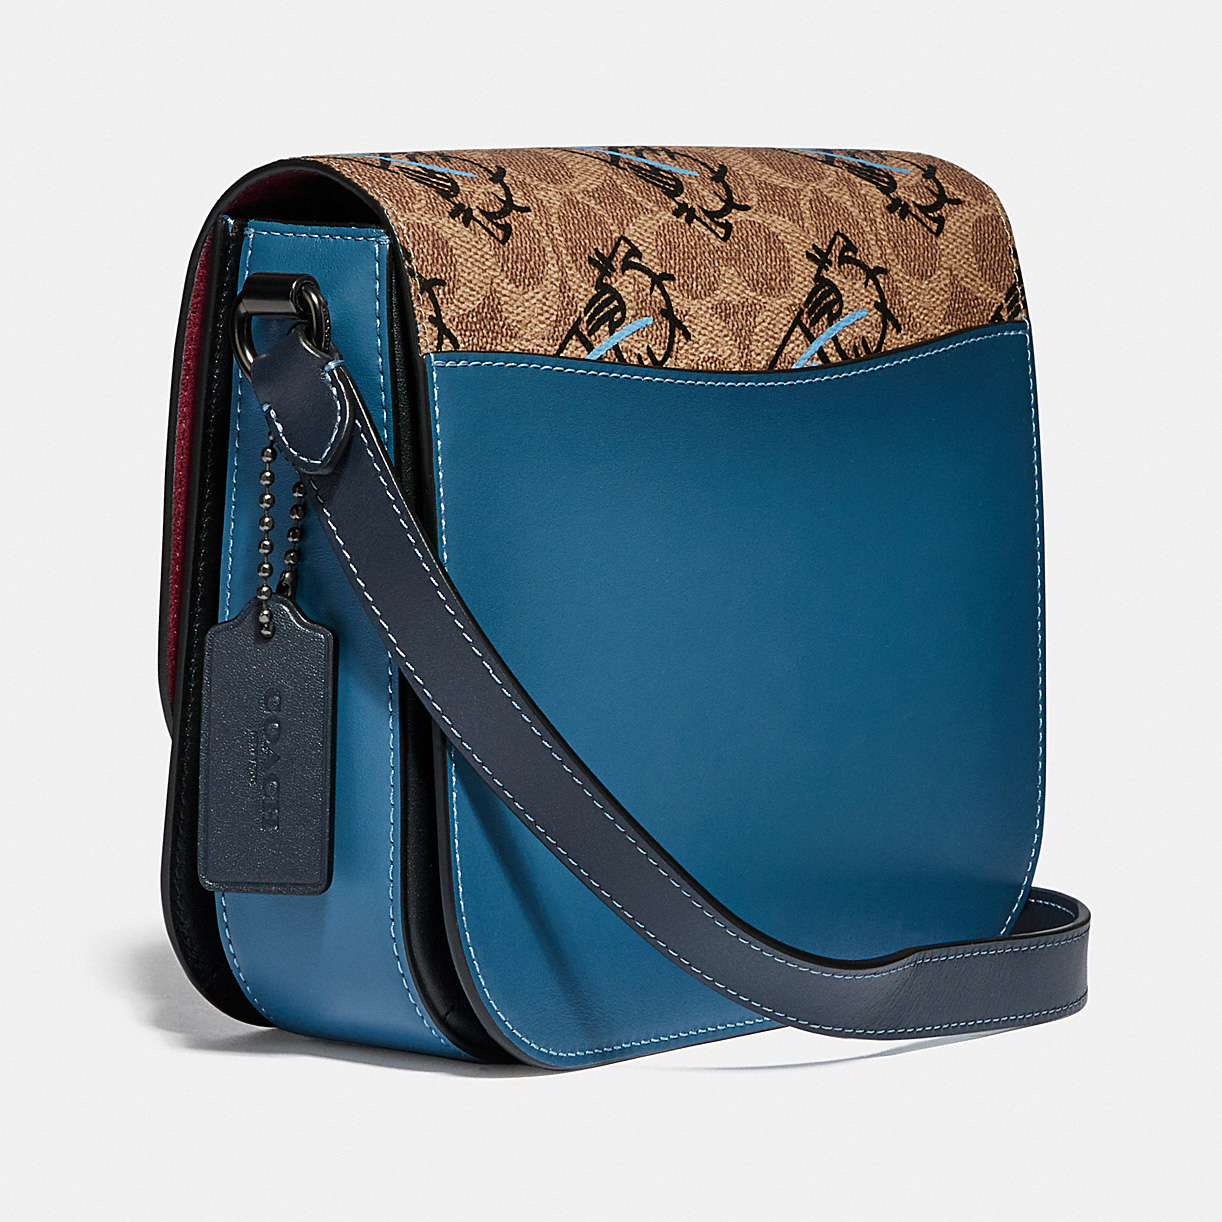 TÚI XÁCH NỮ COACH HUTTON SADDLE BAG WITH ABSTRACT HORSE AND CARIAGE 6